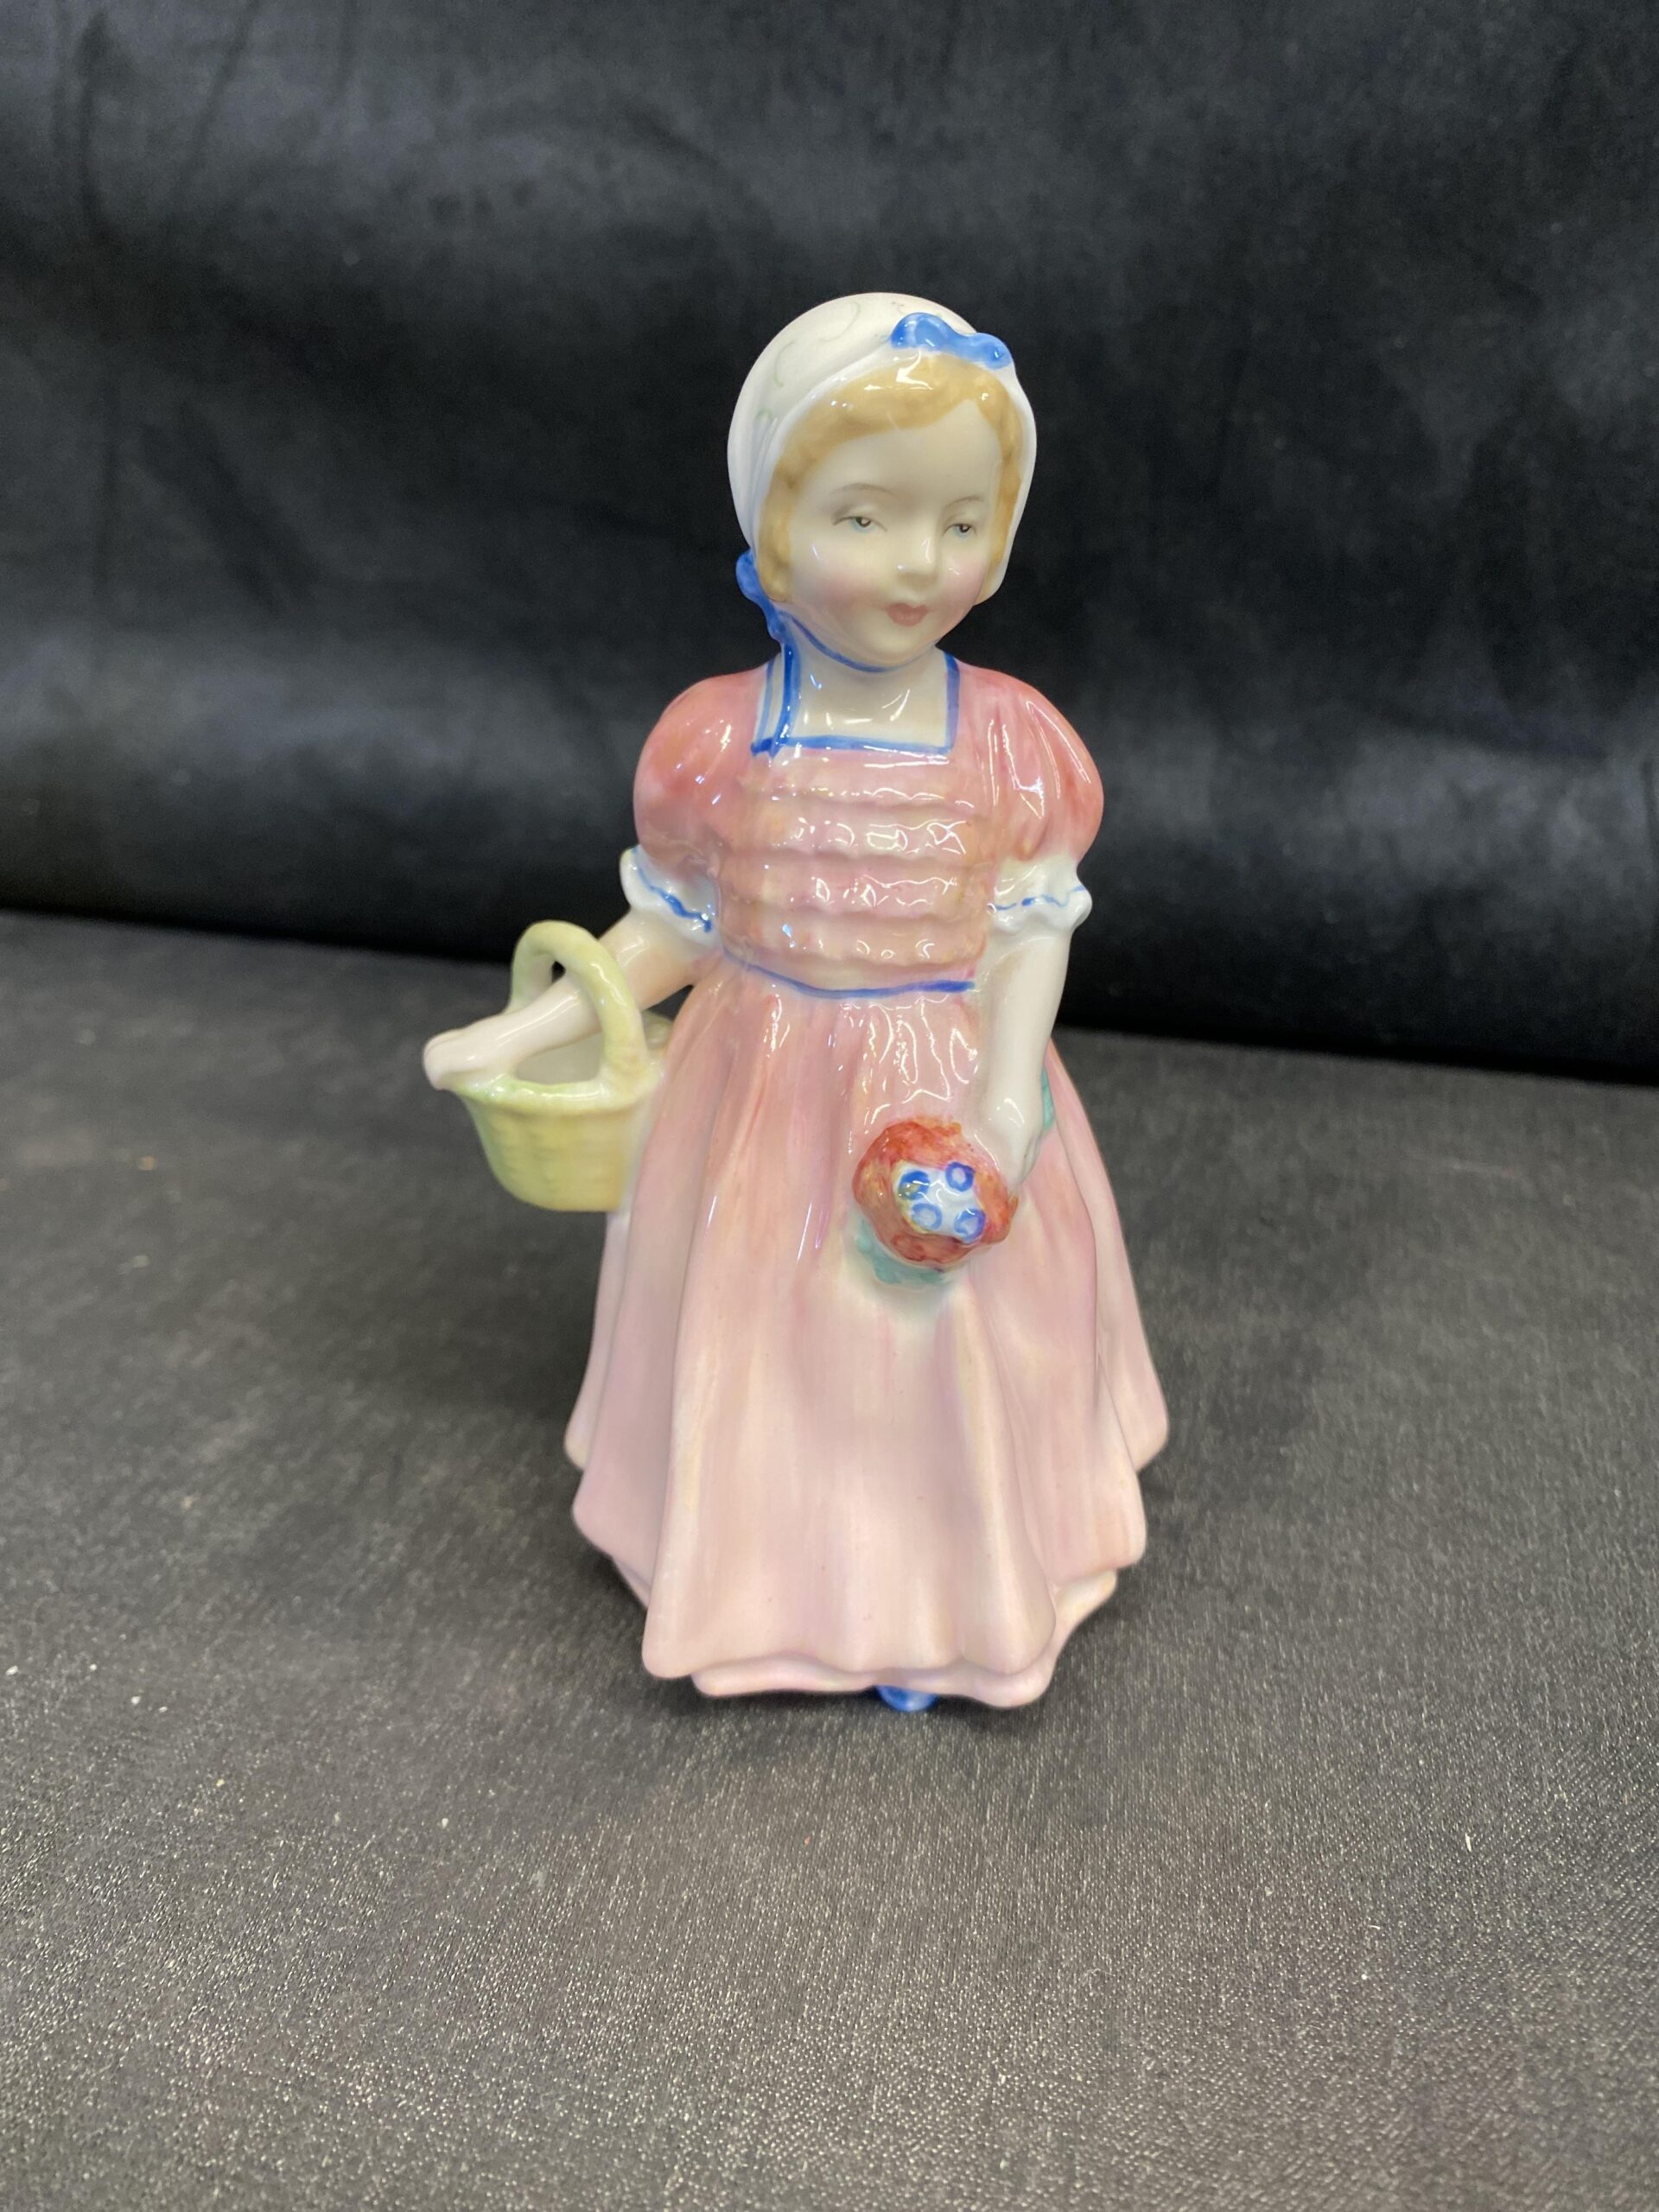 Royal Doulton Figurine “Tinkle Bell”